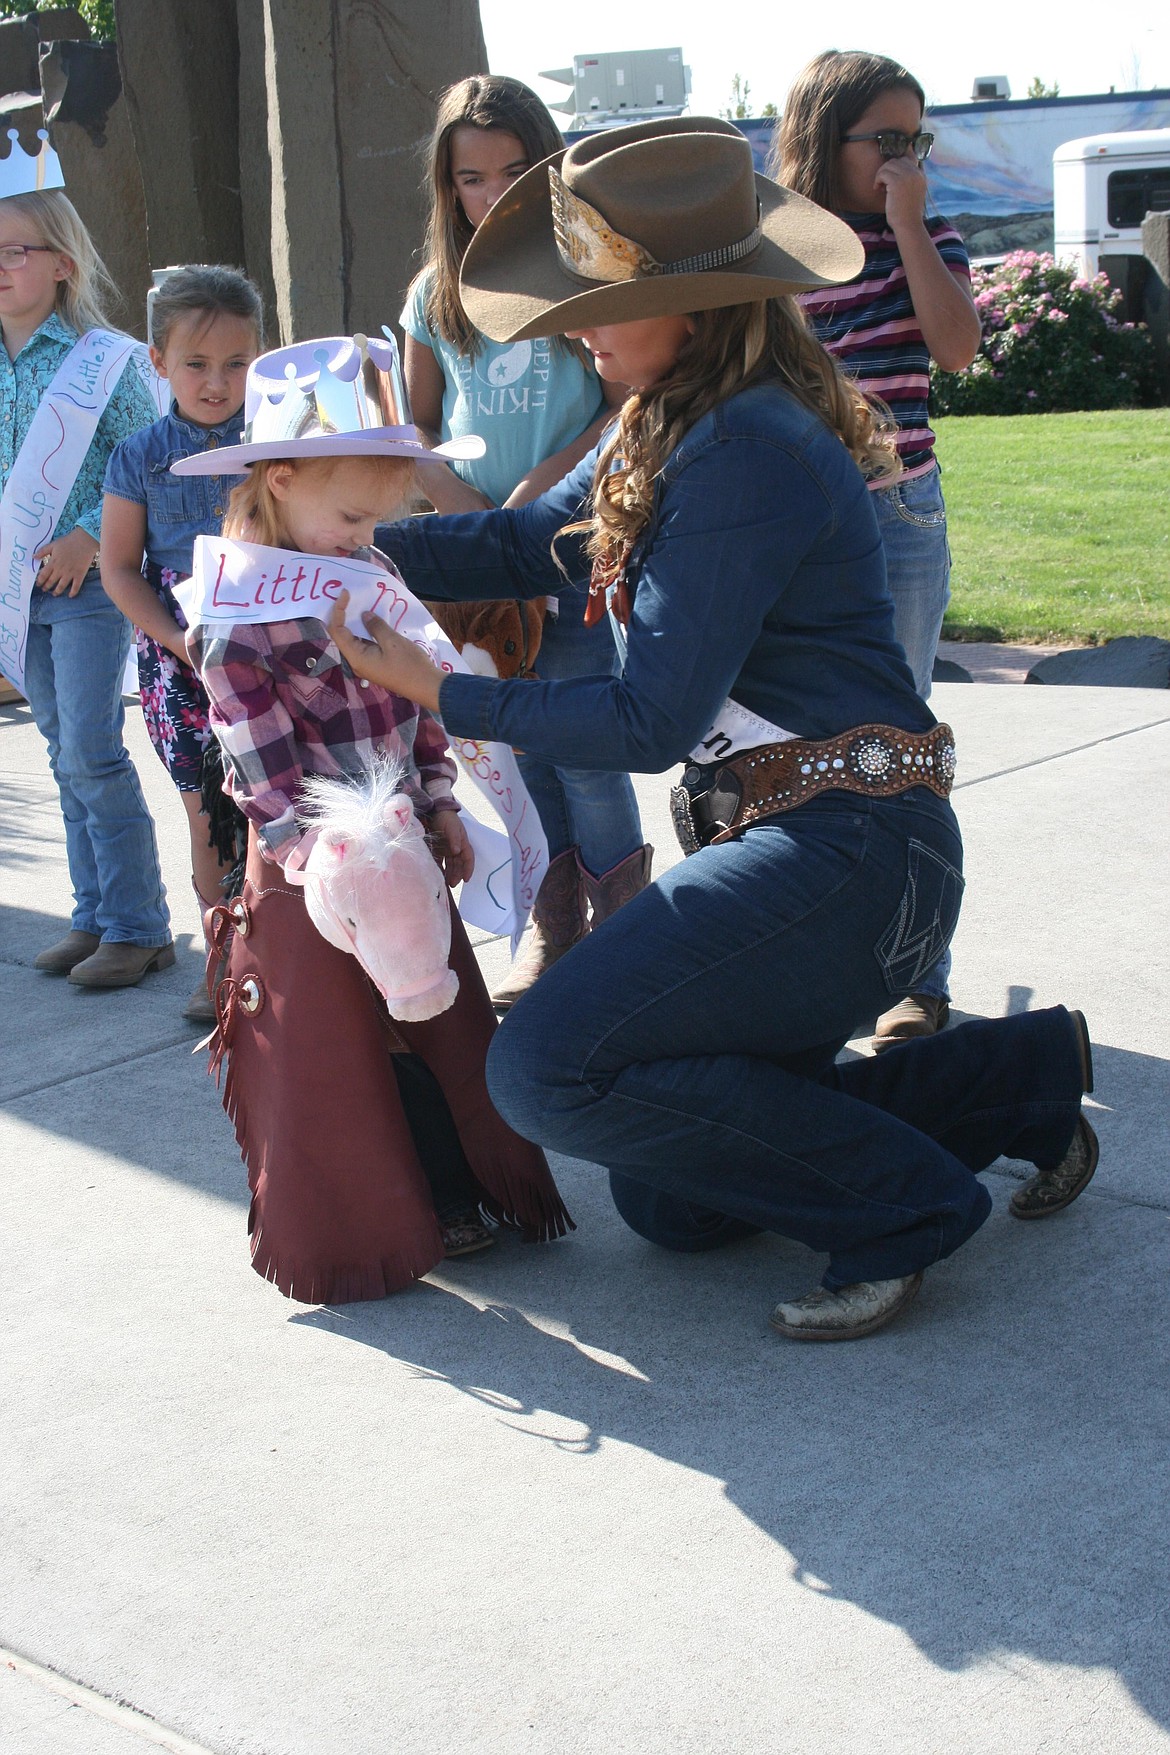 Harper Carey is crowned queen of the Pee Wee Stampede by Miss Moses Lake Roundup Brianna Kin Kade. The children’s games are part of the annual Cowboy Breakfast, the traditional kickoff for the Grant County Fair and Moses Lake Roundup.